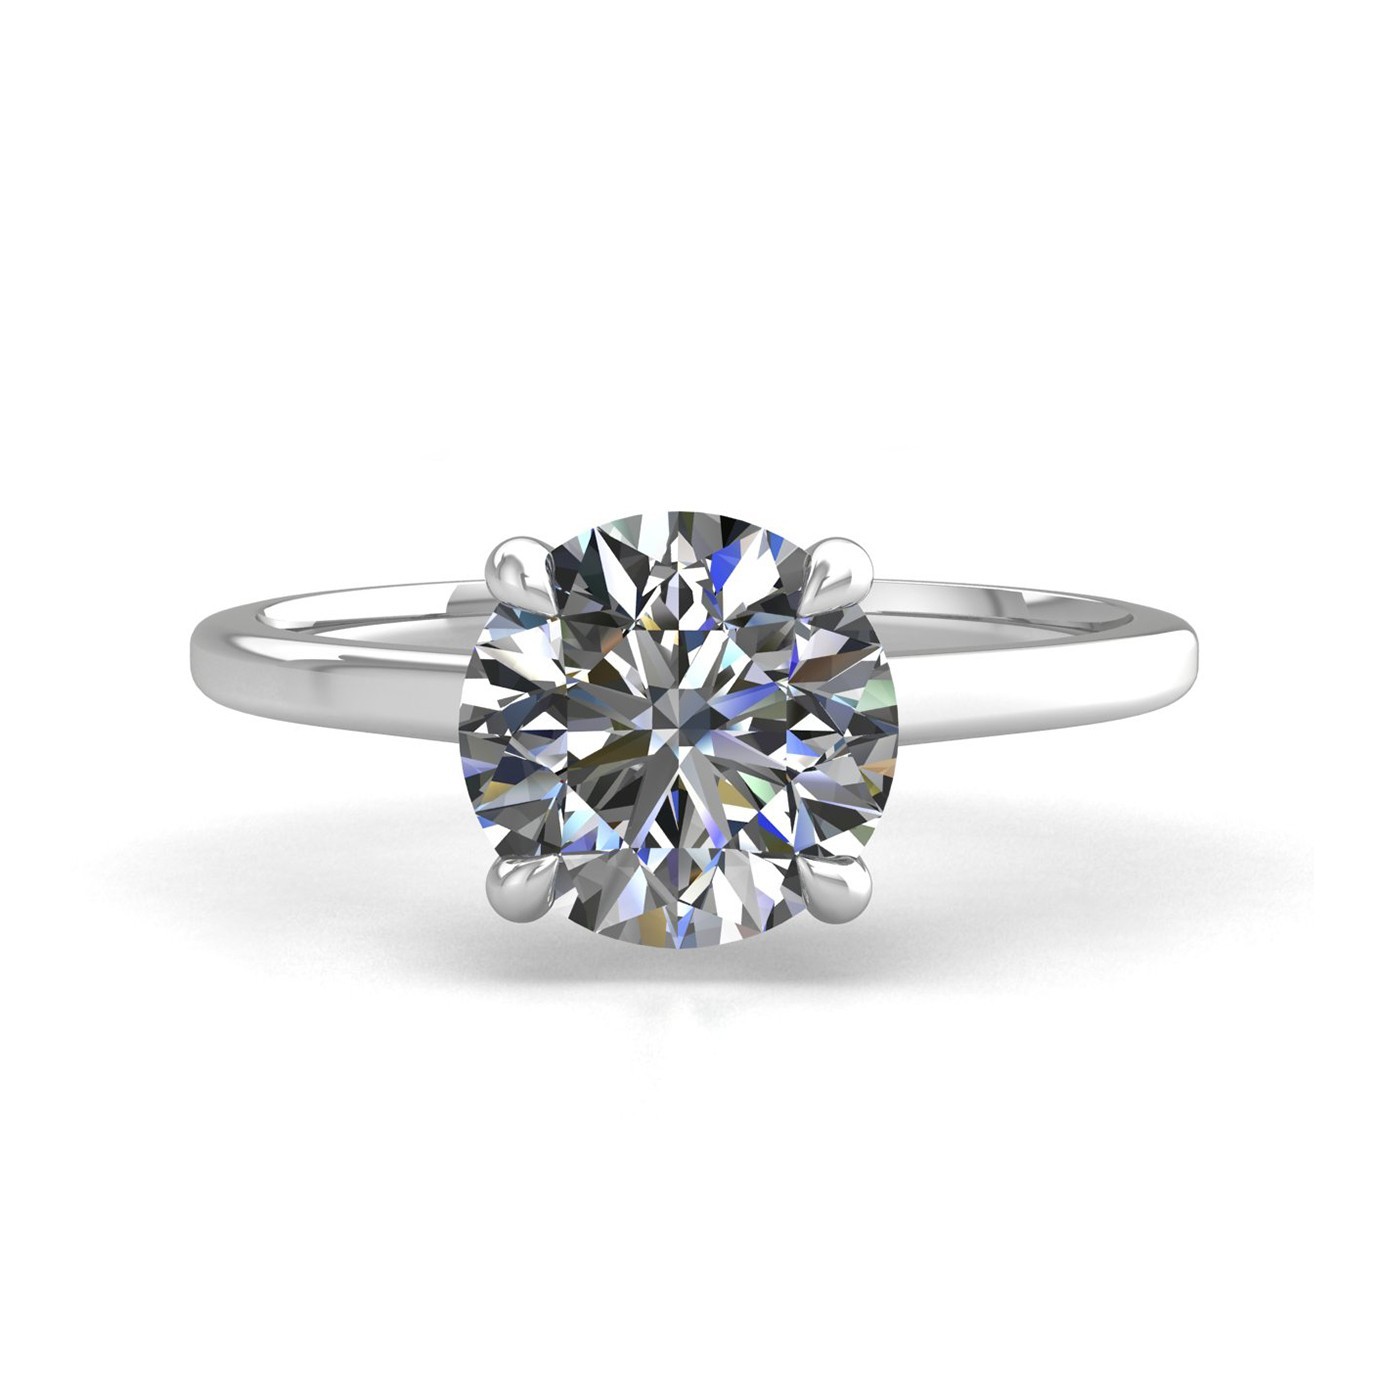 18k white gold 1.0ct 4 prongs solitaire round cut diamond engagement ring with whisper thin band Photos & images